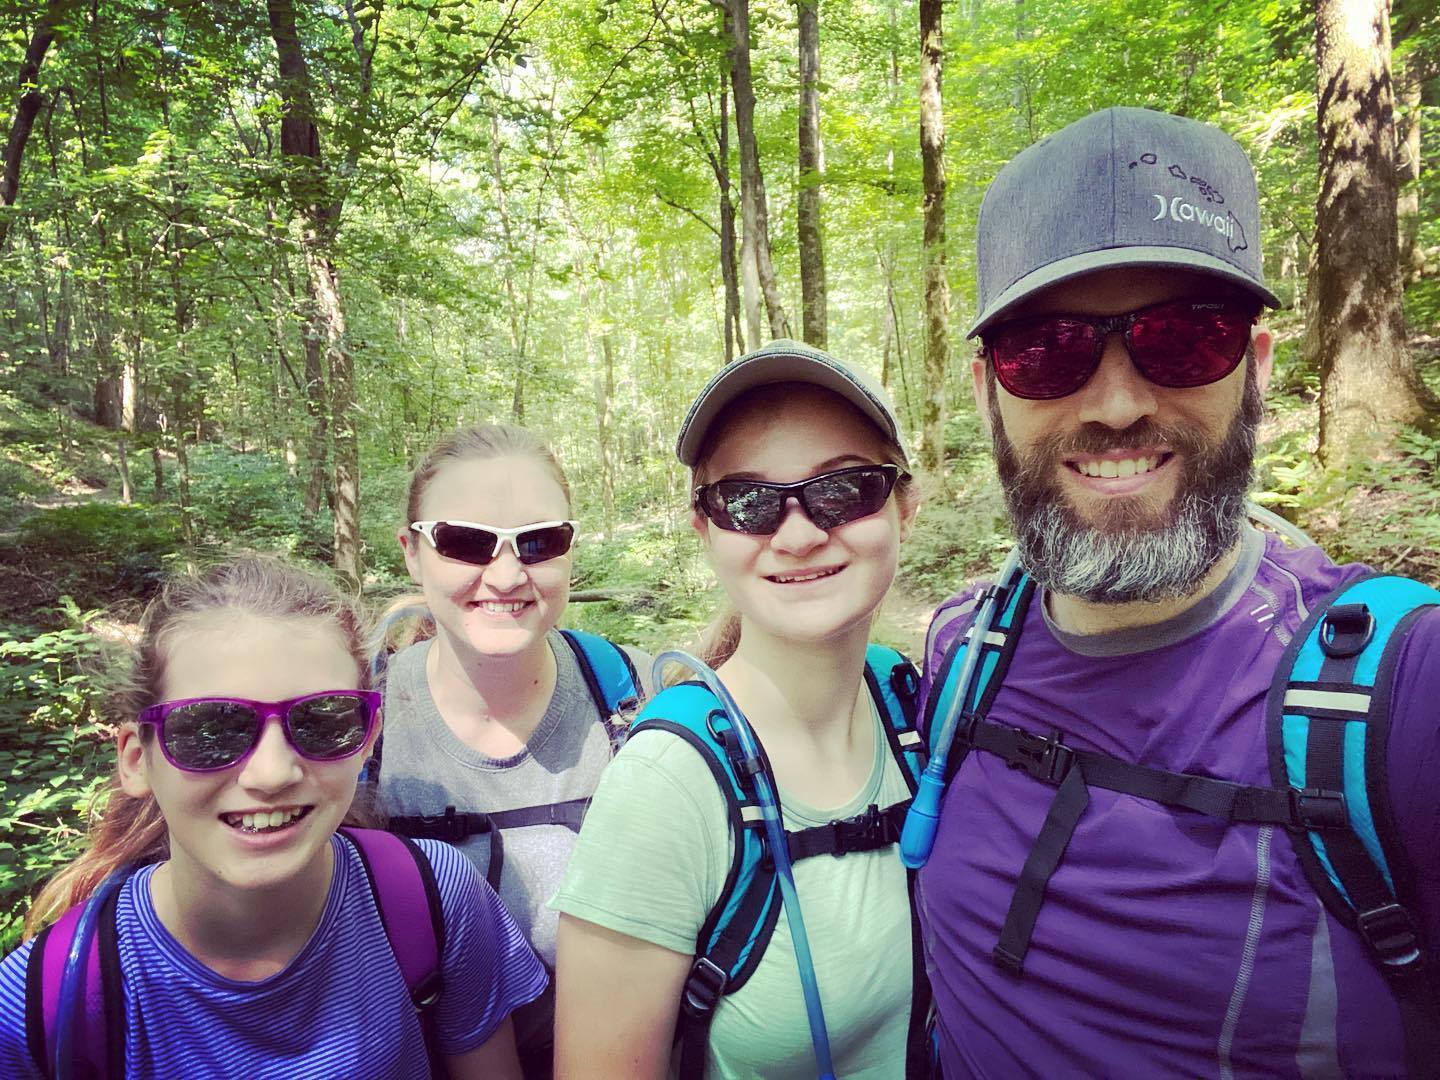 We had quite an adventure hiking the Garrison Creek Loop along the Natchez Trace today. #family #hiking